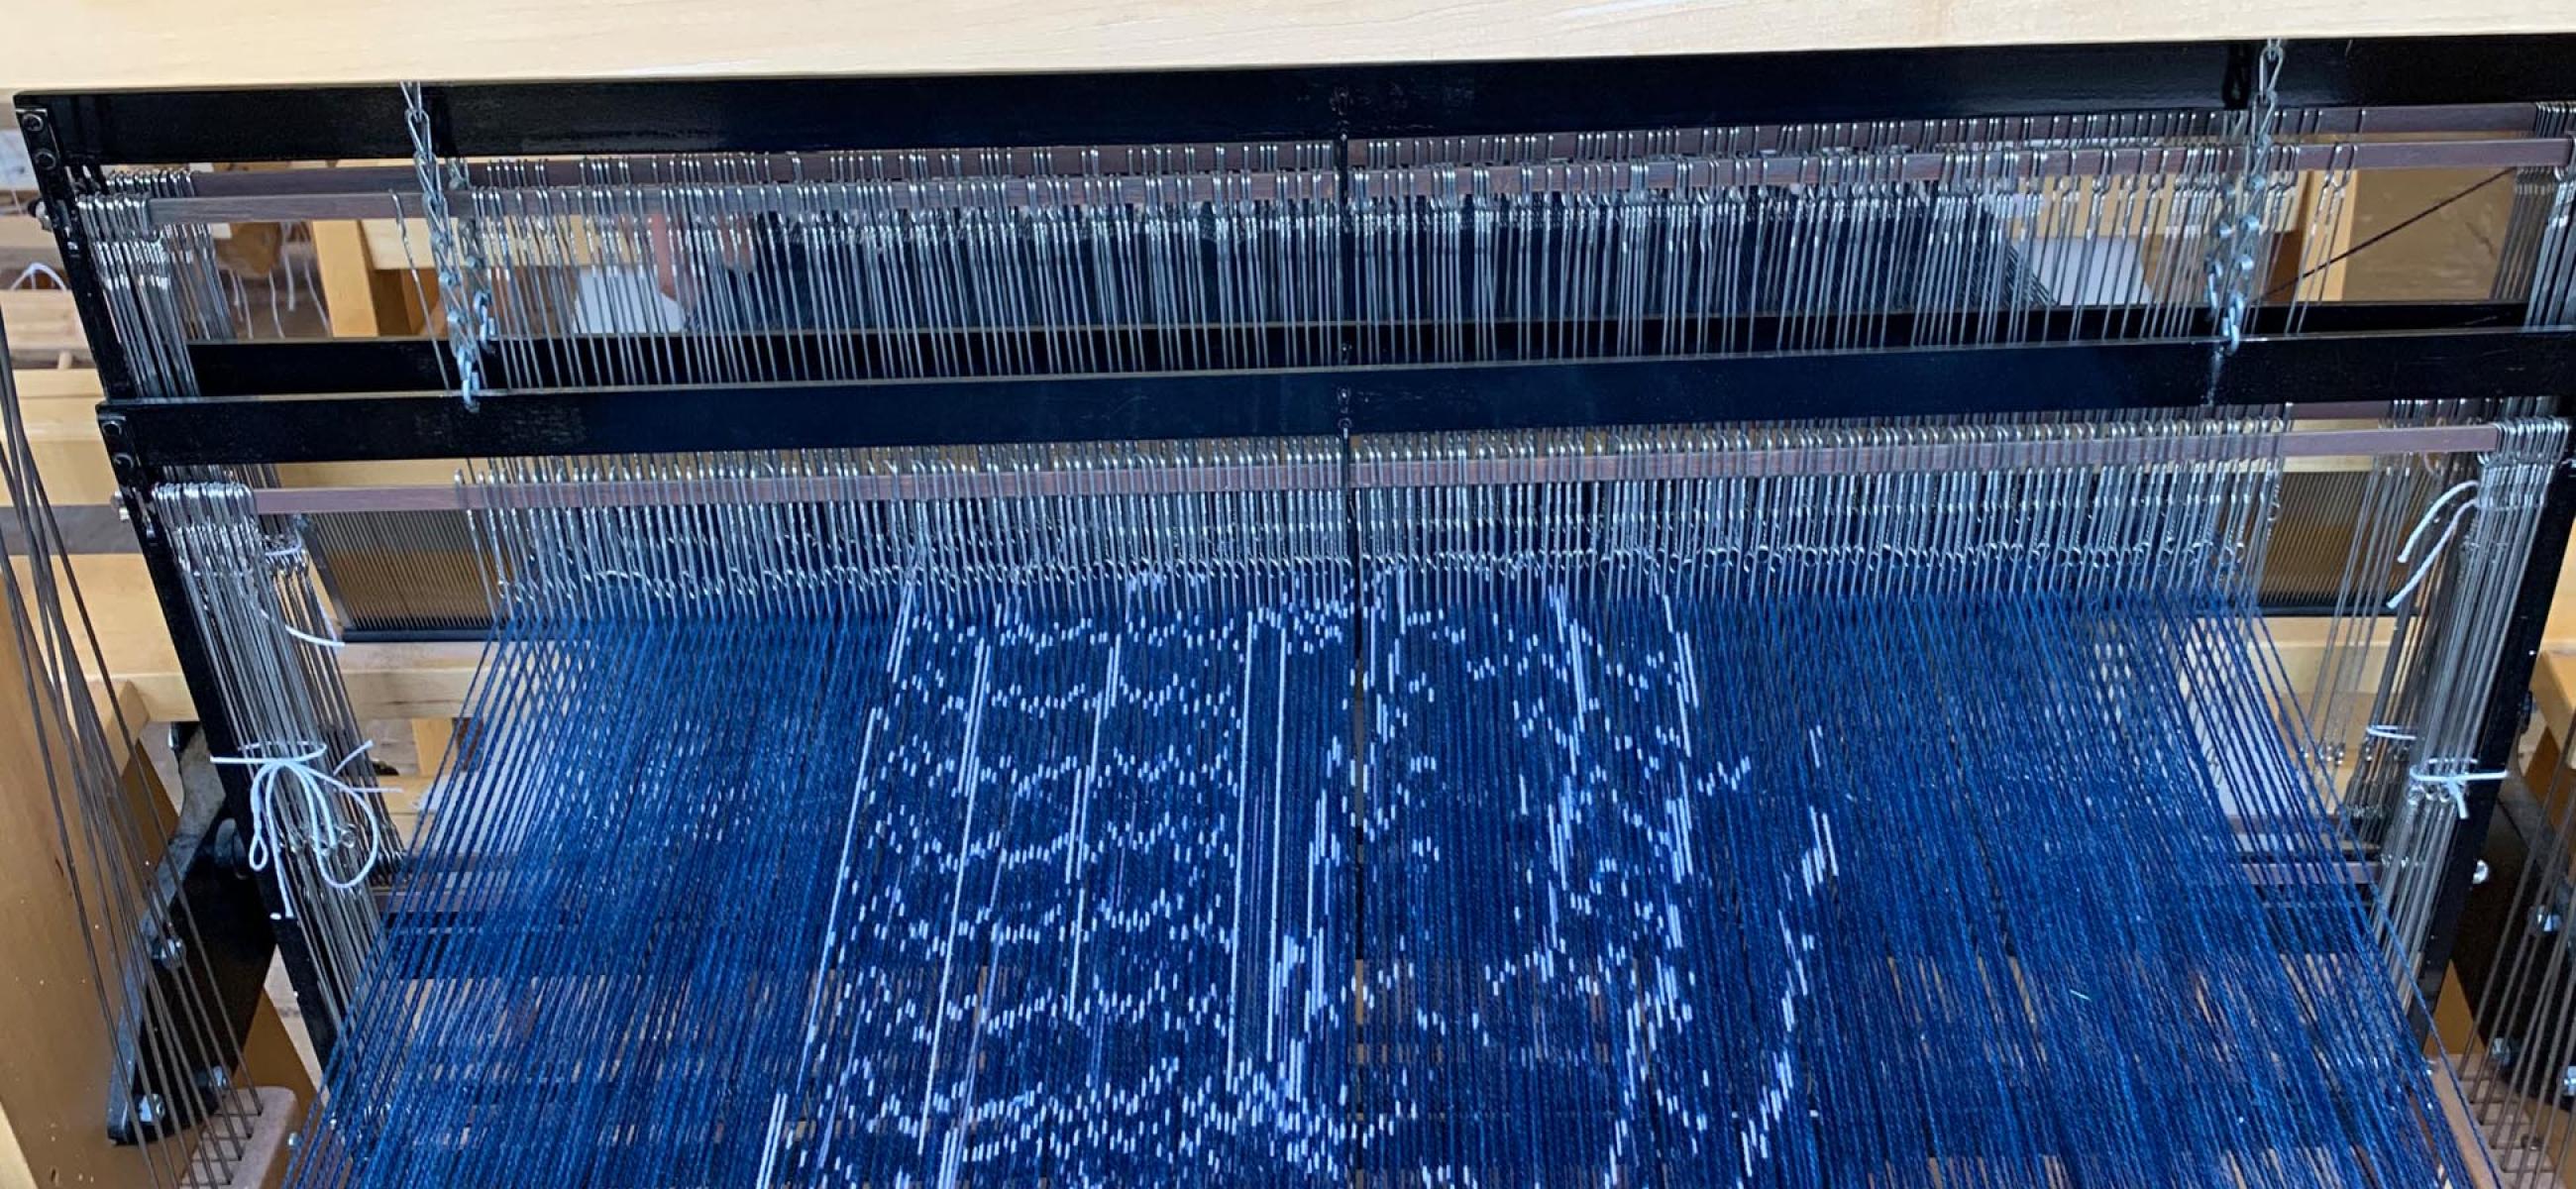 a loom with blue fabric and thread